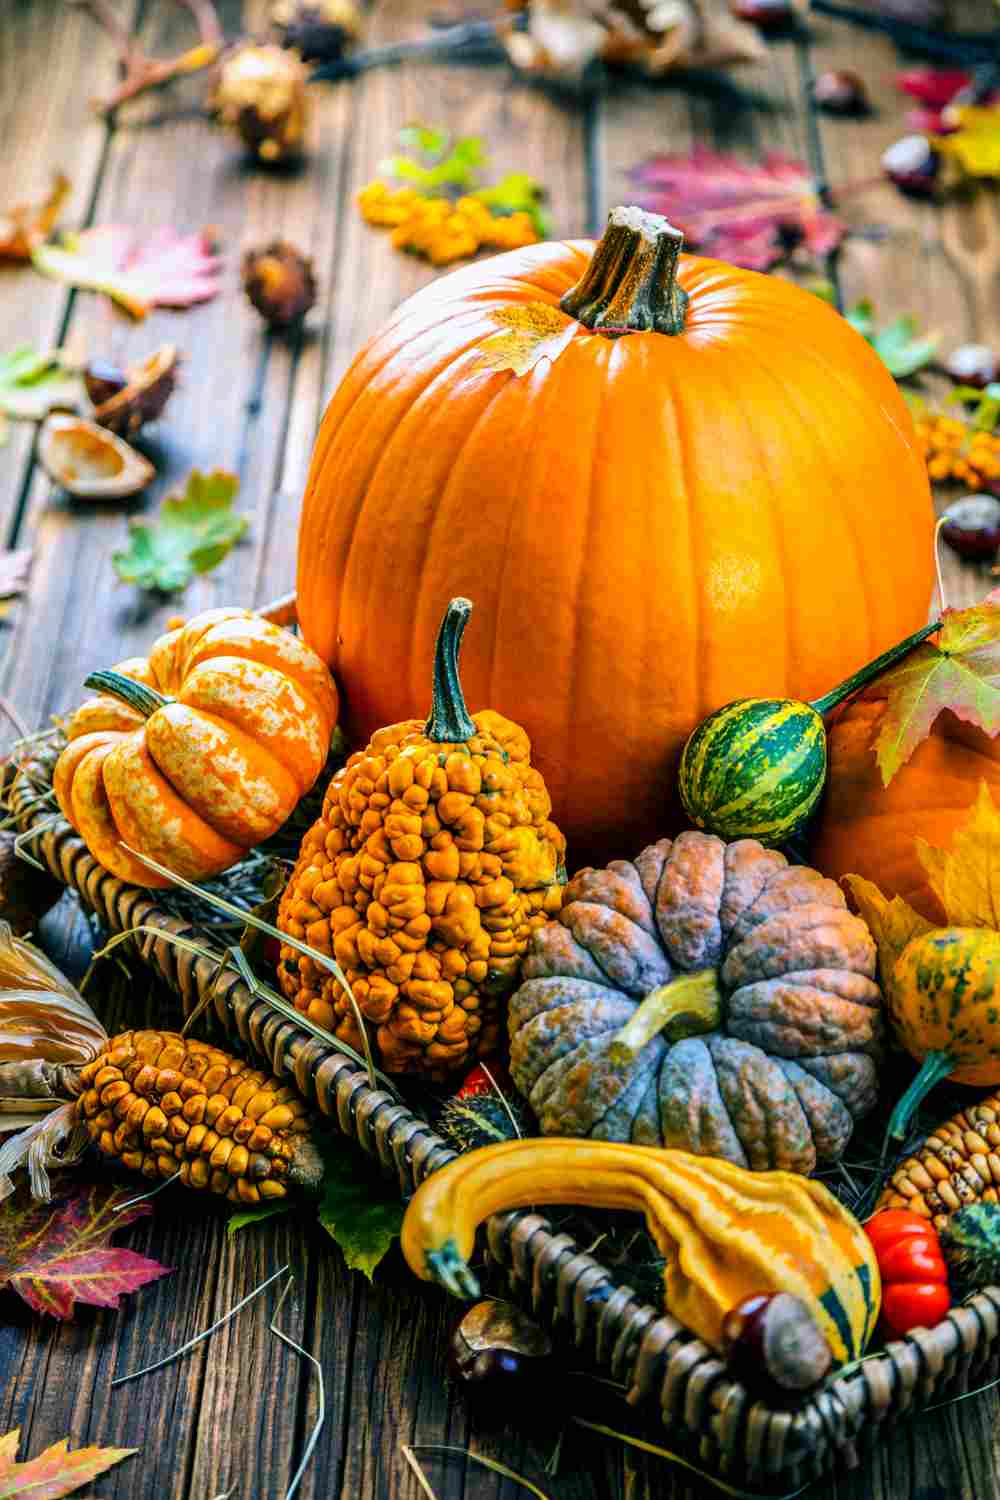 A basket of the different types and colors of pumpkins.